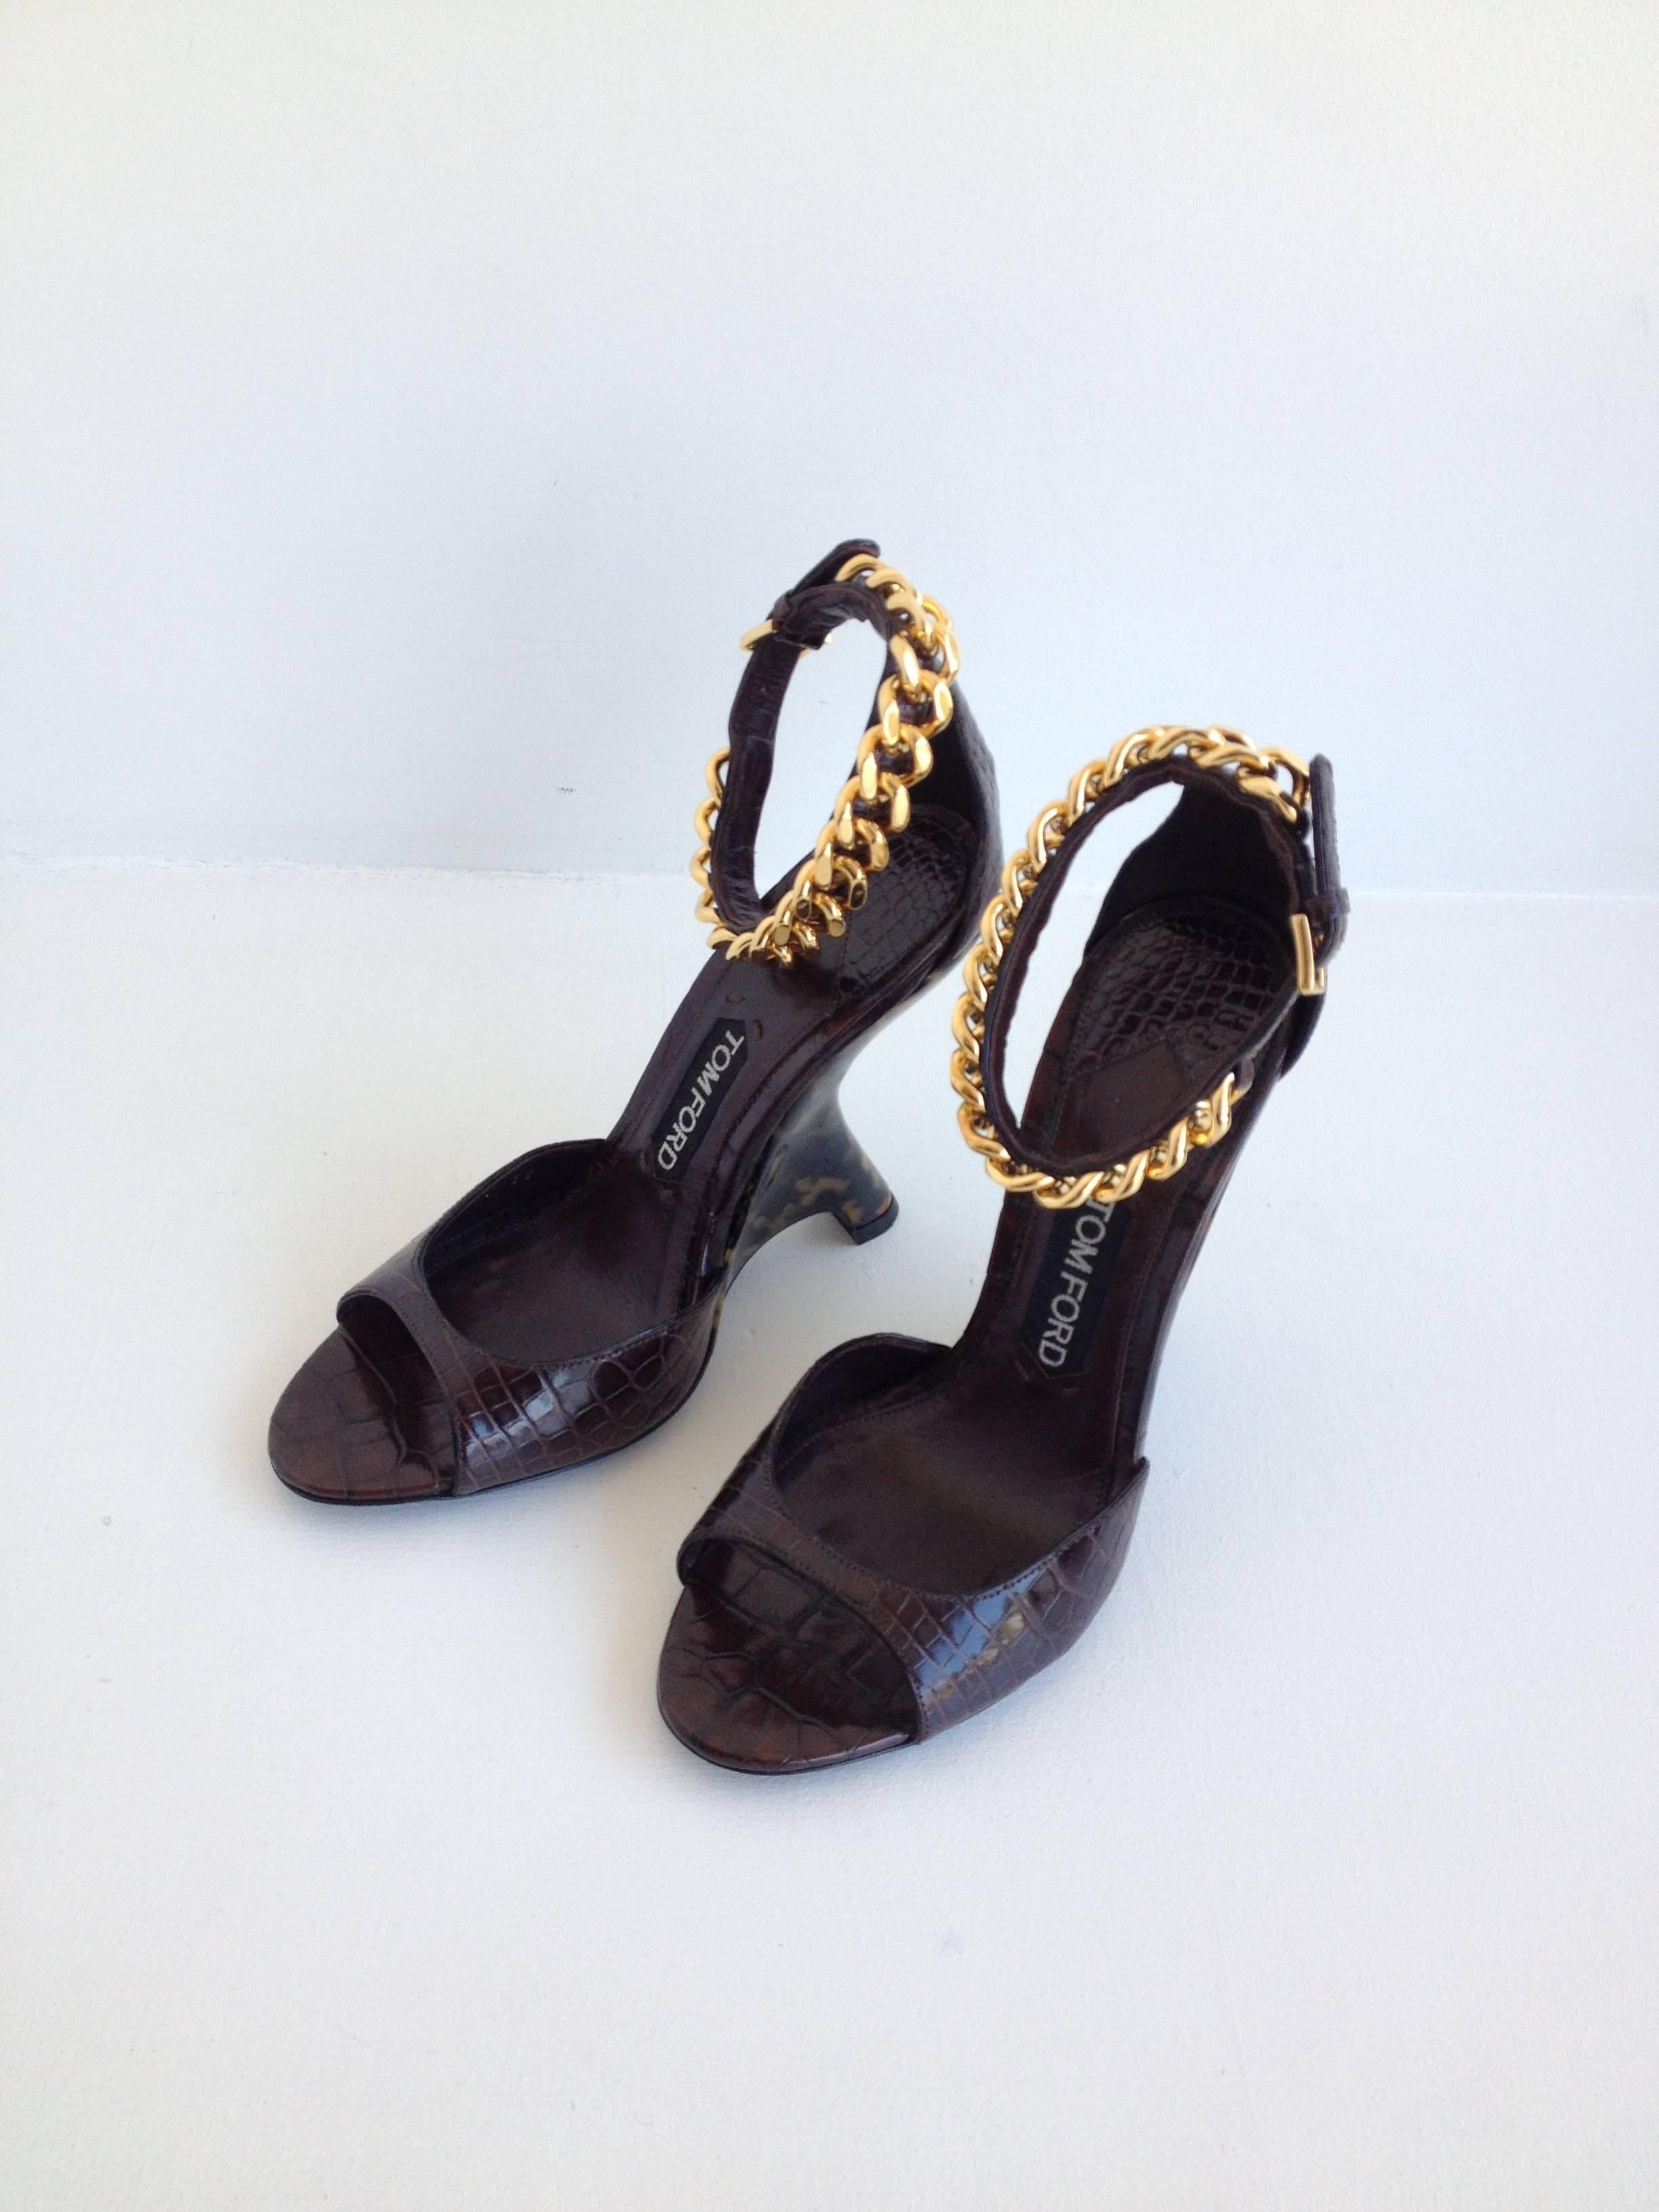 So many incredible elements converge in this Tom Ford shoe - there's the luxurious brown crocodile skin, the opulent thick gold curb chain, and that dramatic sculptural 4.5 inch heel in faux tortoise shell. These are bold and cool, perfect for